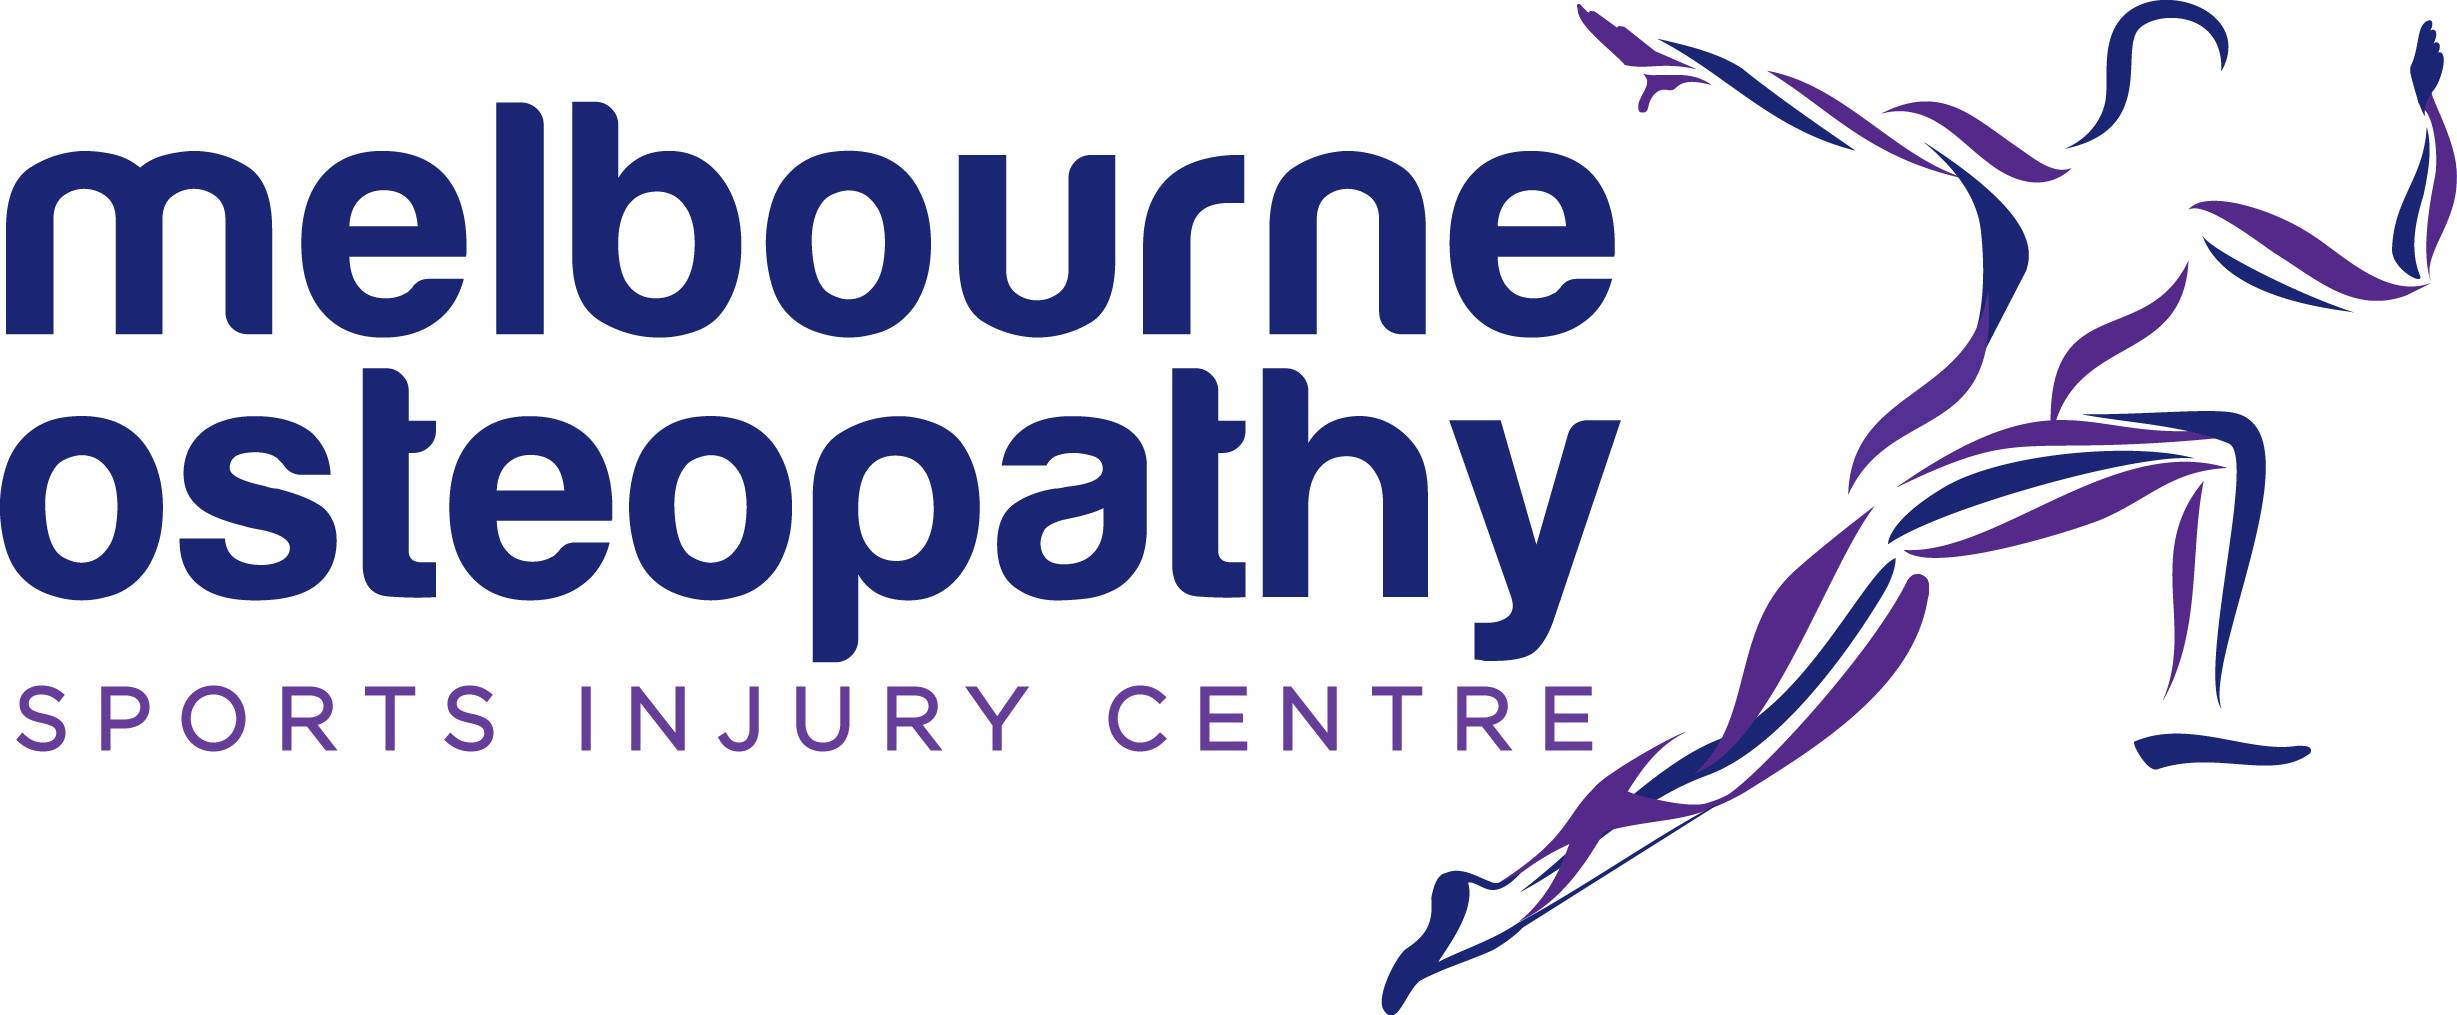 Melbourne Osteopathy Sports Injury Pilates Centre  Street Image